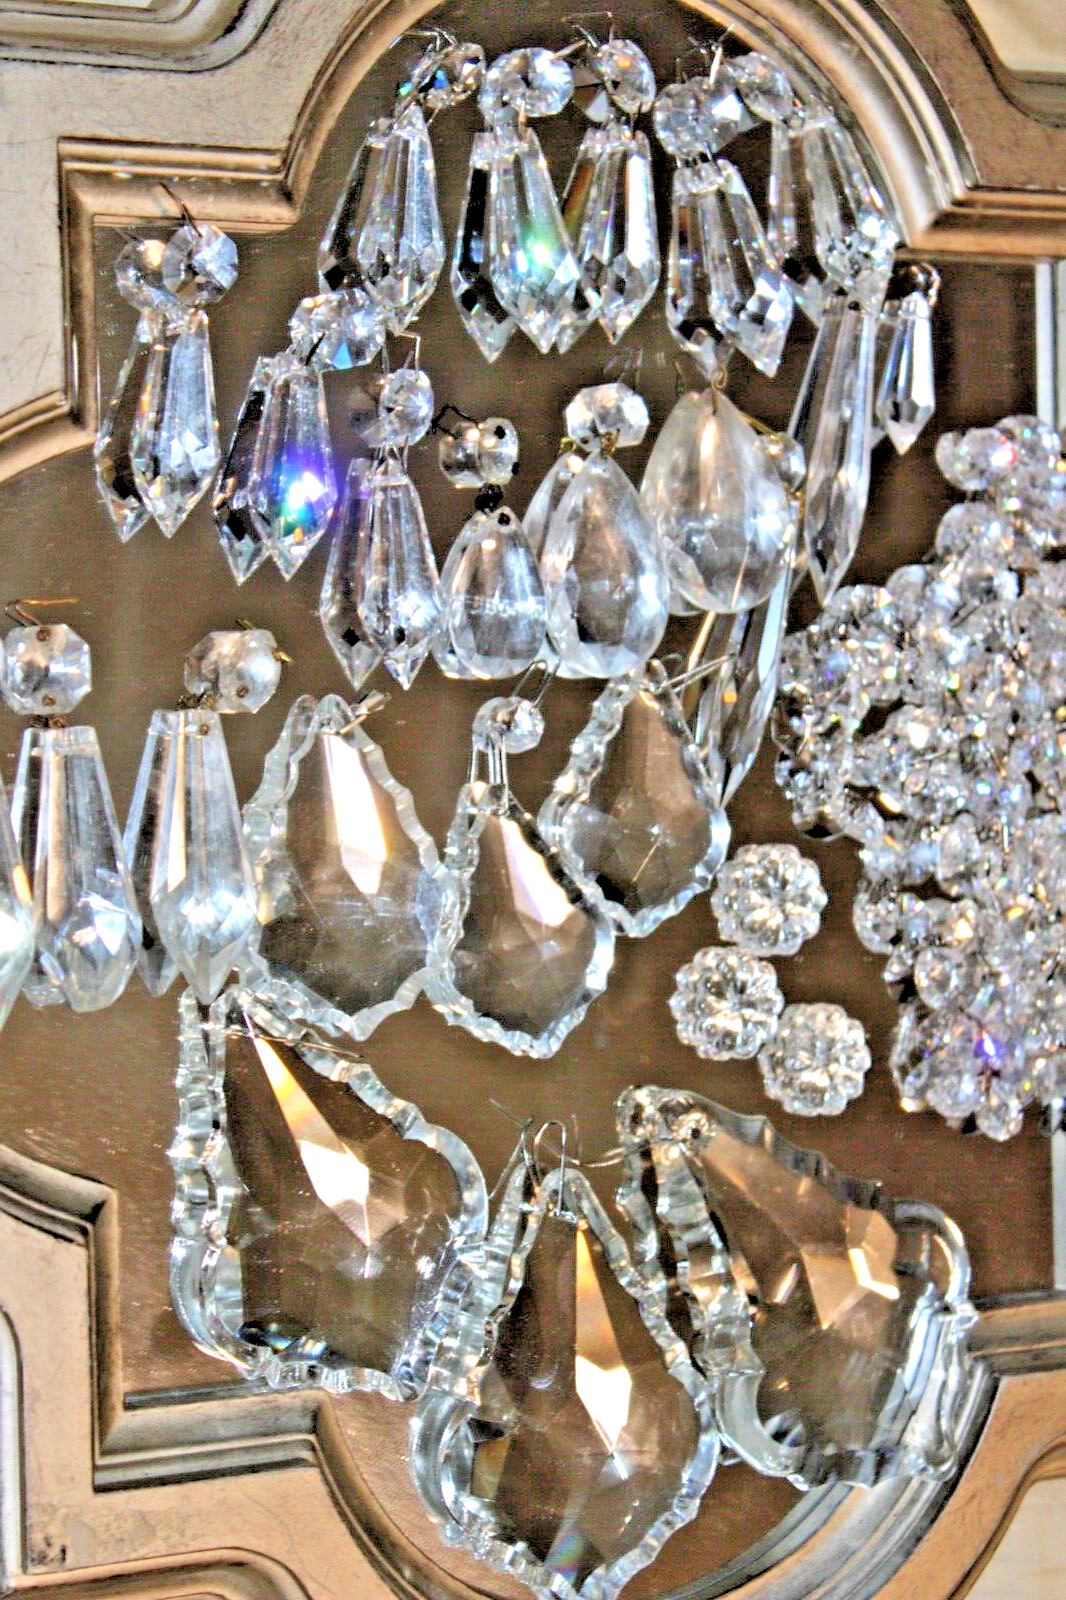 Lot 100+ Waterford Crystal Chandelier Prism Various Sizes & Shapes